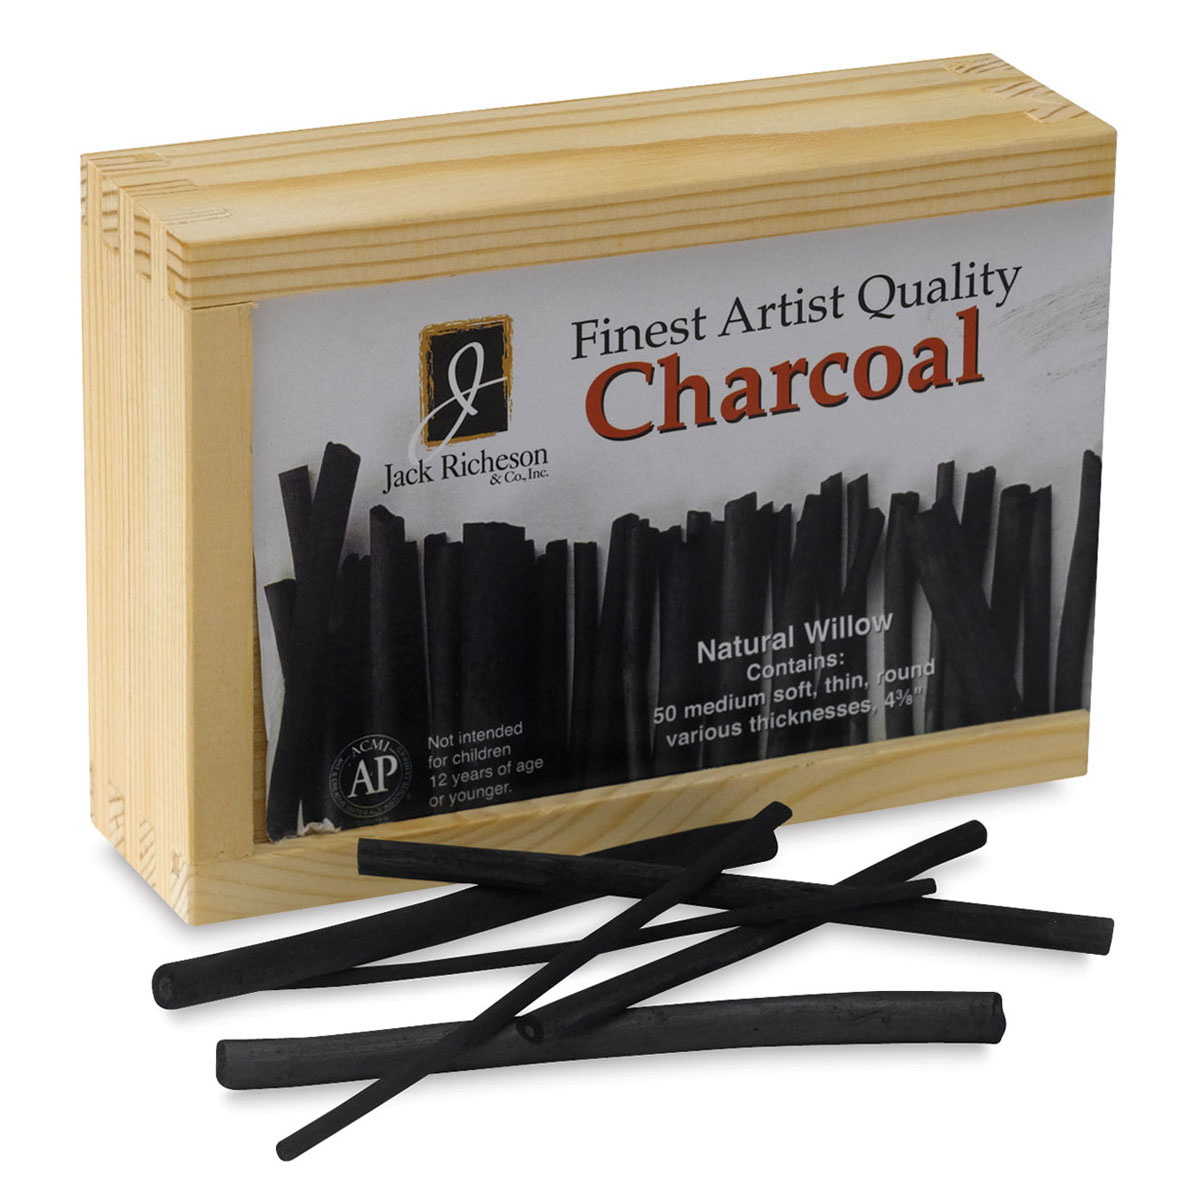 Richeson Natural Willow Charcoal - Box of 50